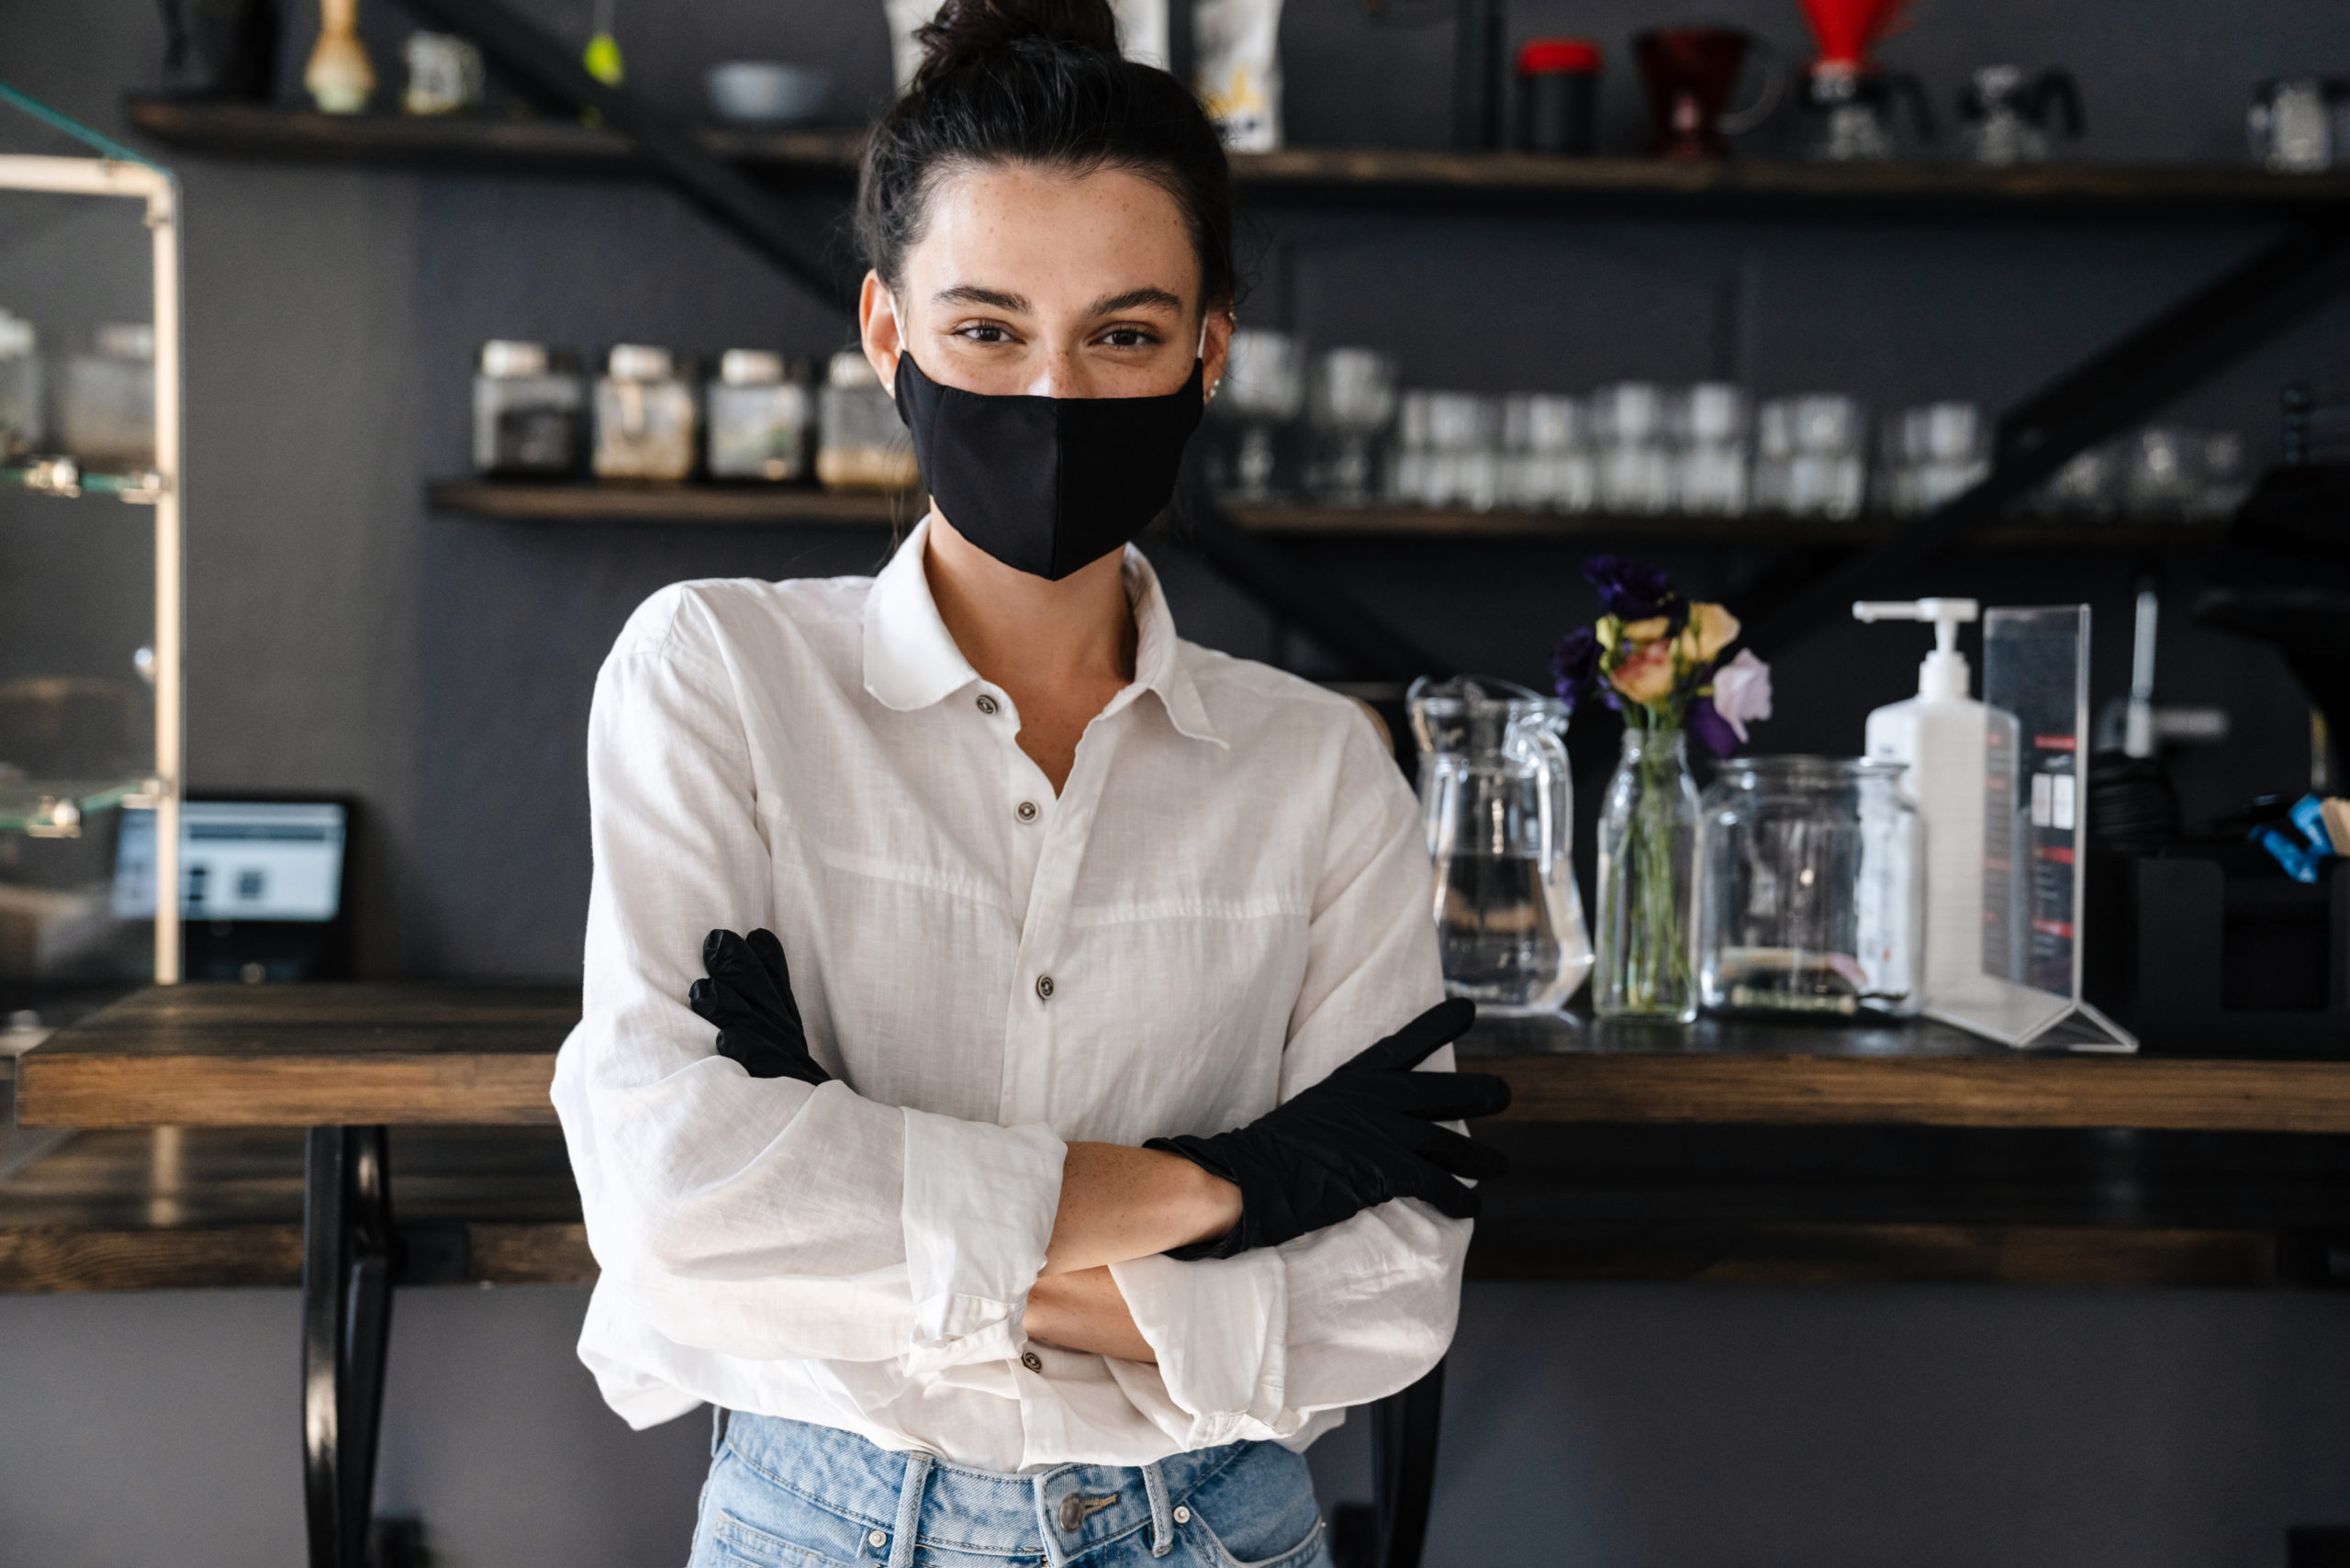 Female small business owner stands in front of her bar, wearing gloves and a face mask.